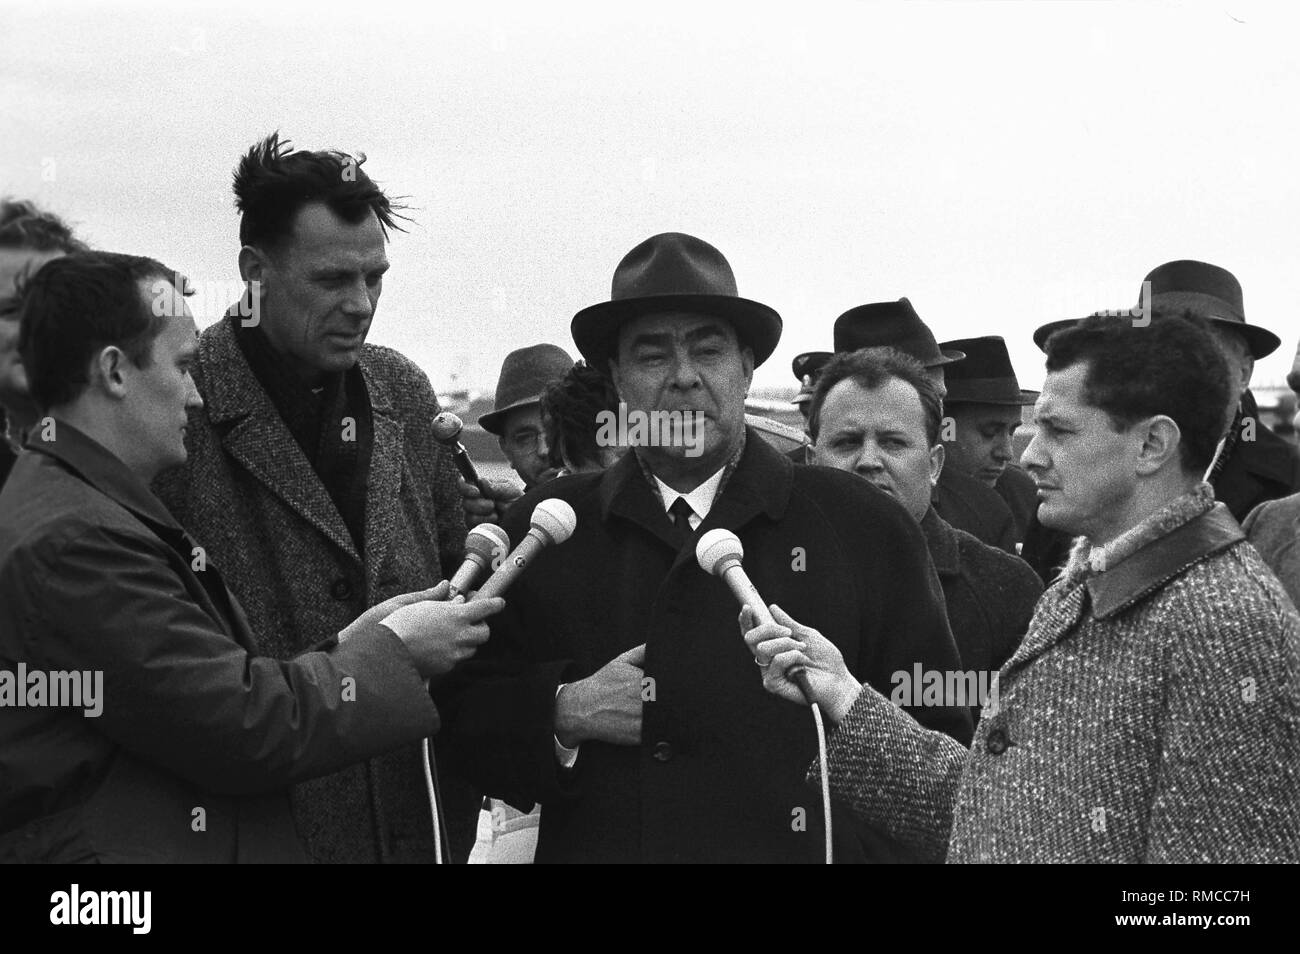 The General Secretary of the CPSU, Leonid Brezhnev, is being interviewed by journalists at the Erfurt Airport. Stock Photo